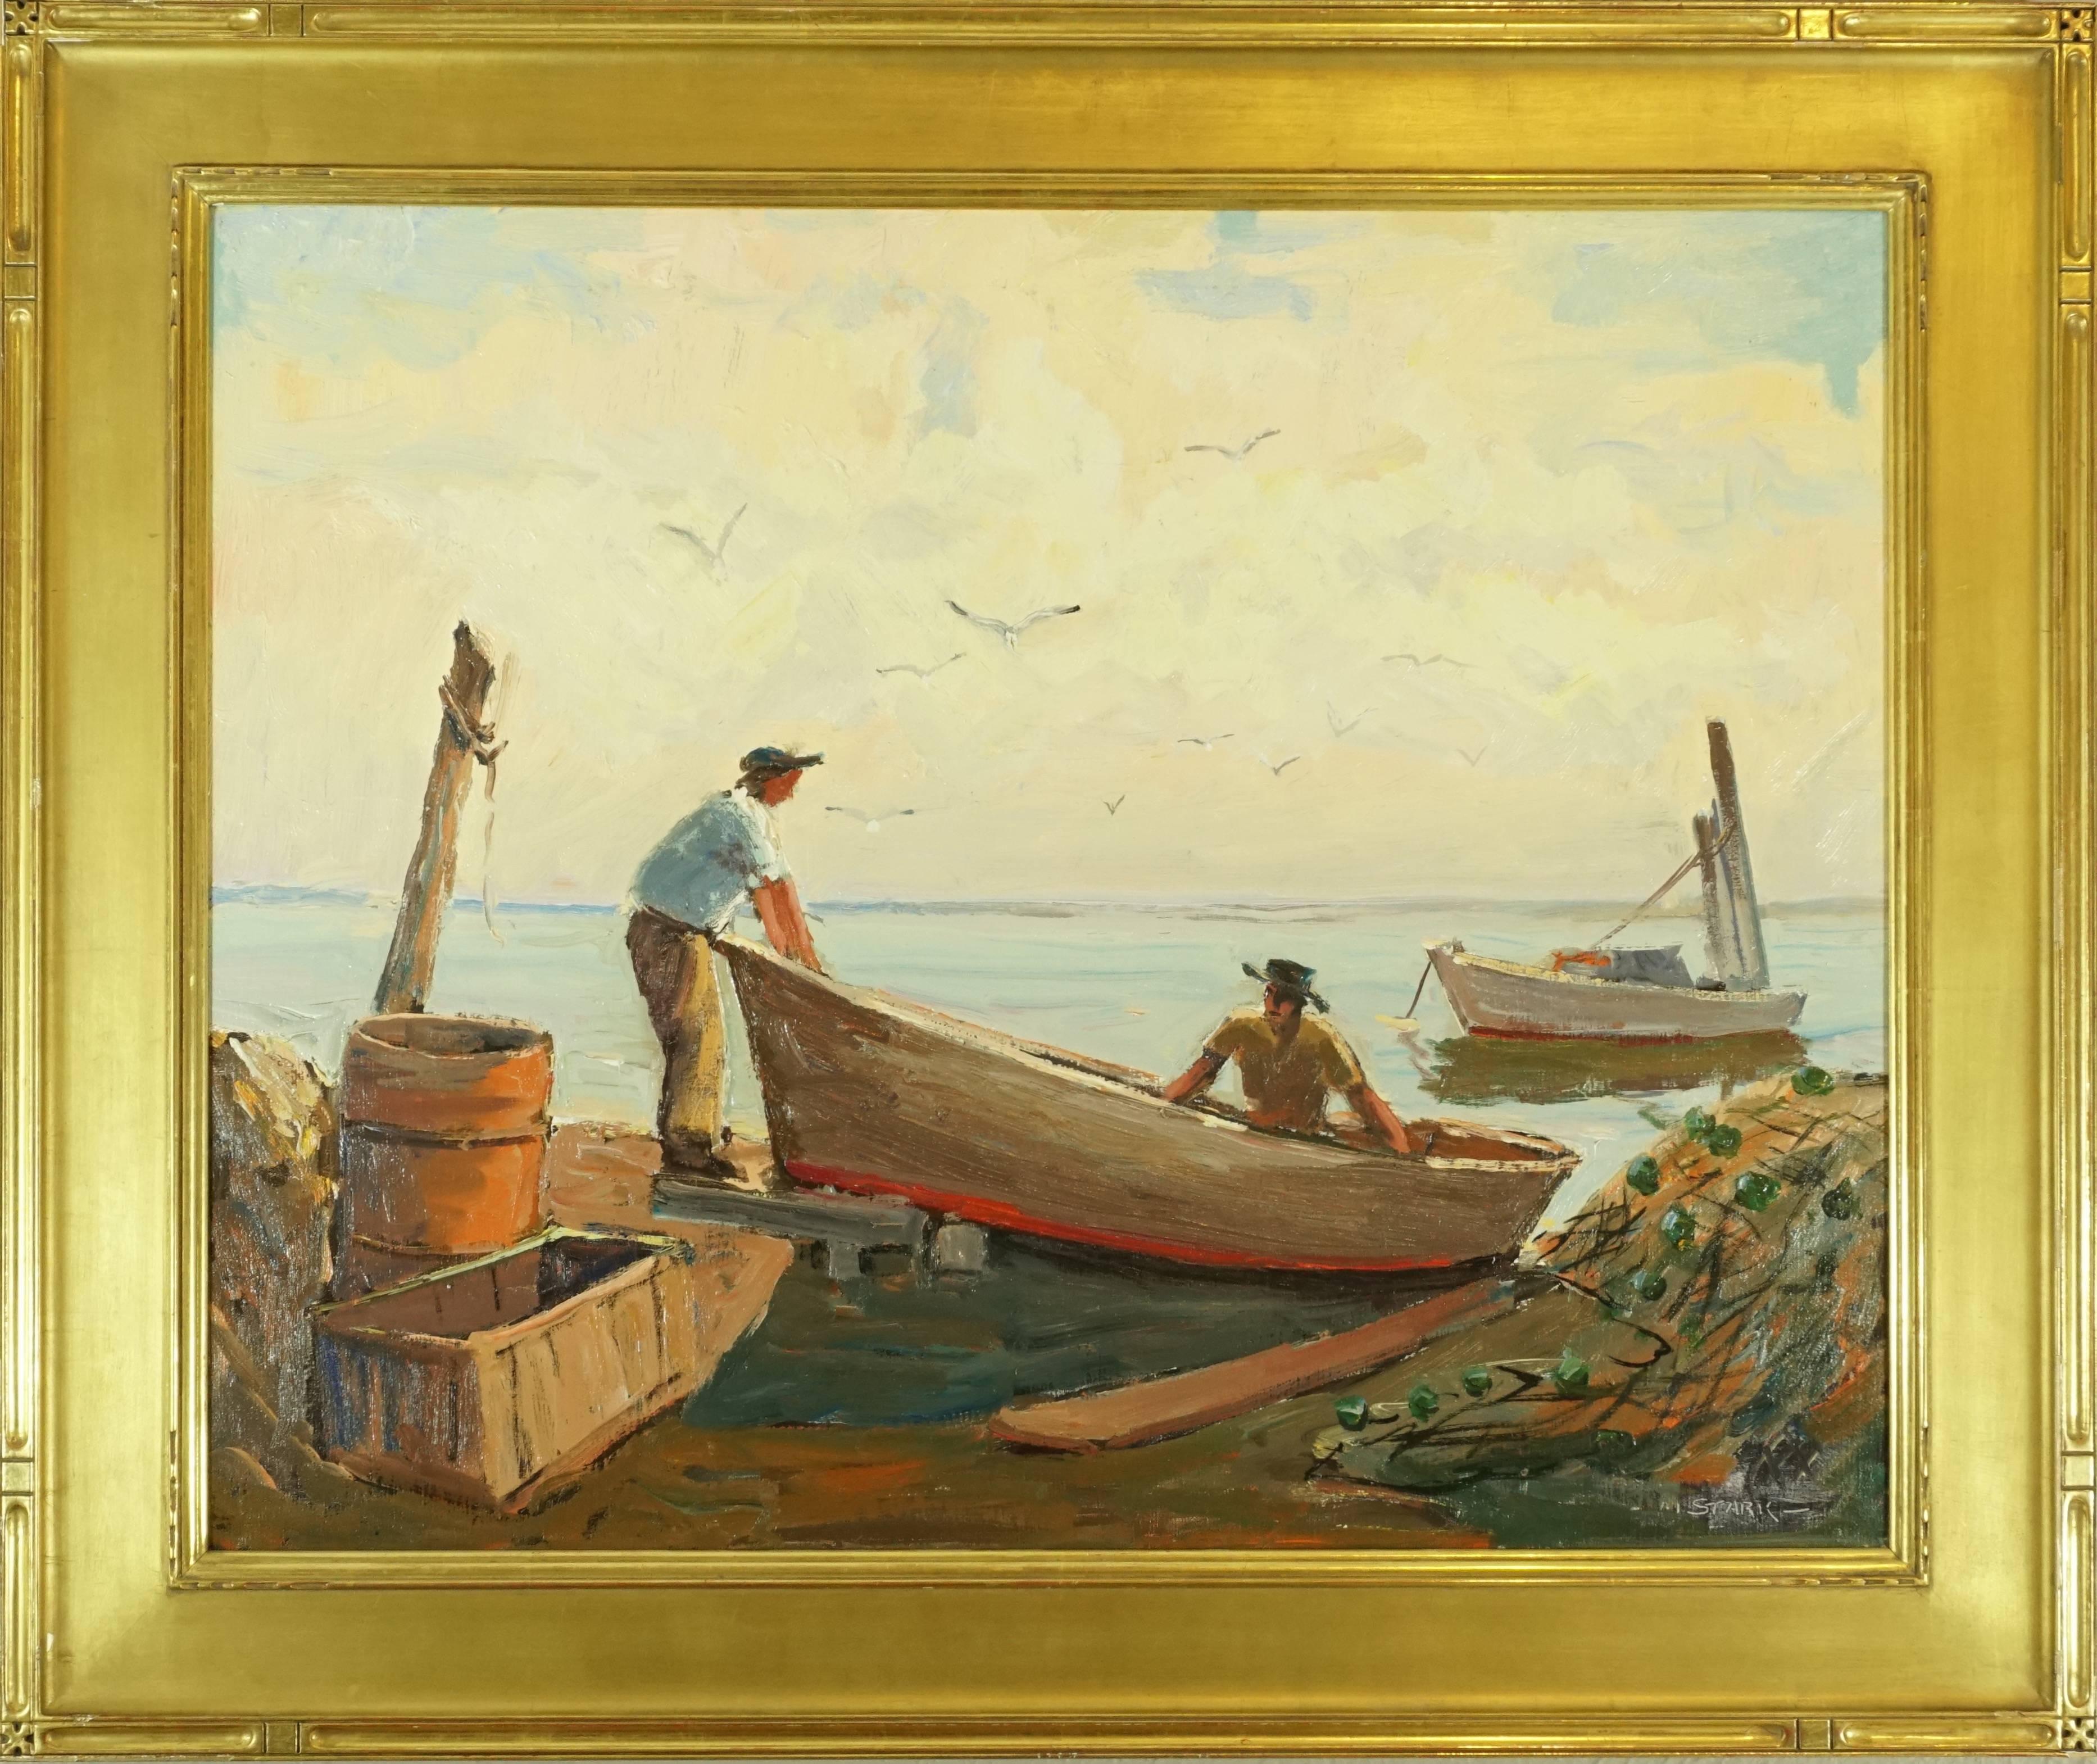 Melville F Stark (American 1903-1987) Better know as Mel Stark. Light and colorful oil on canvas of fisherman bringing in the catch on Longboat Key with nets at the dock. Please also consider our other Stark and several Emile Albert Gruppe paintings